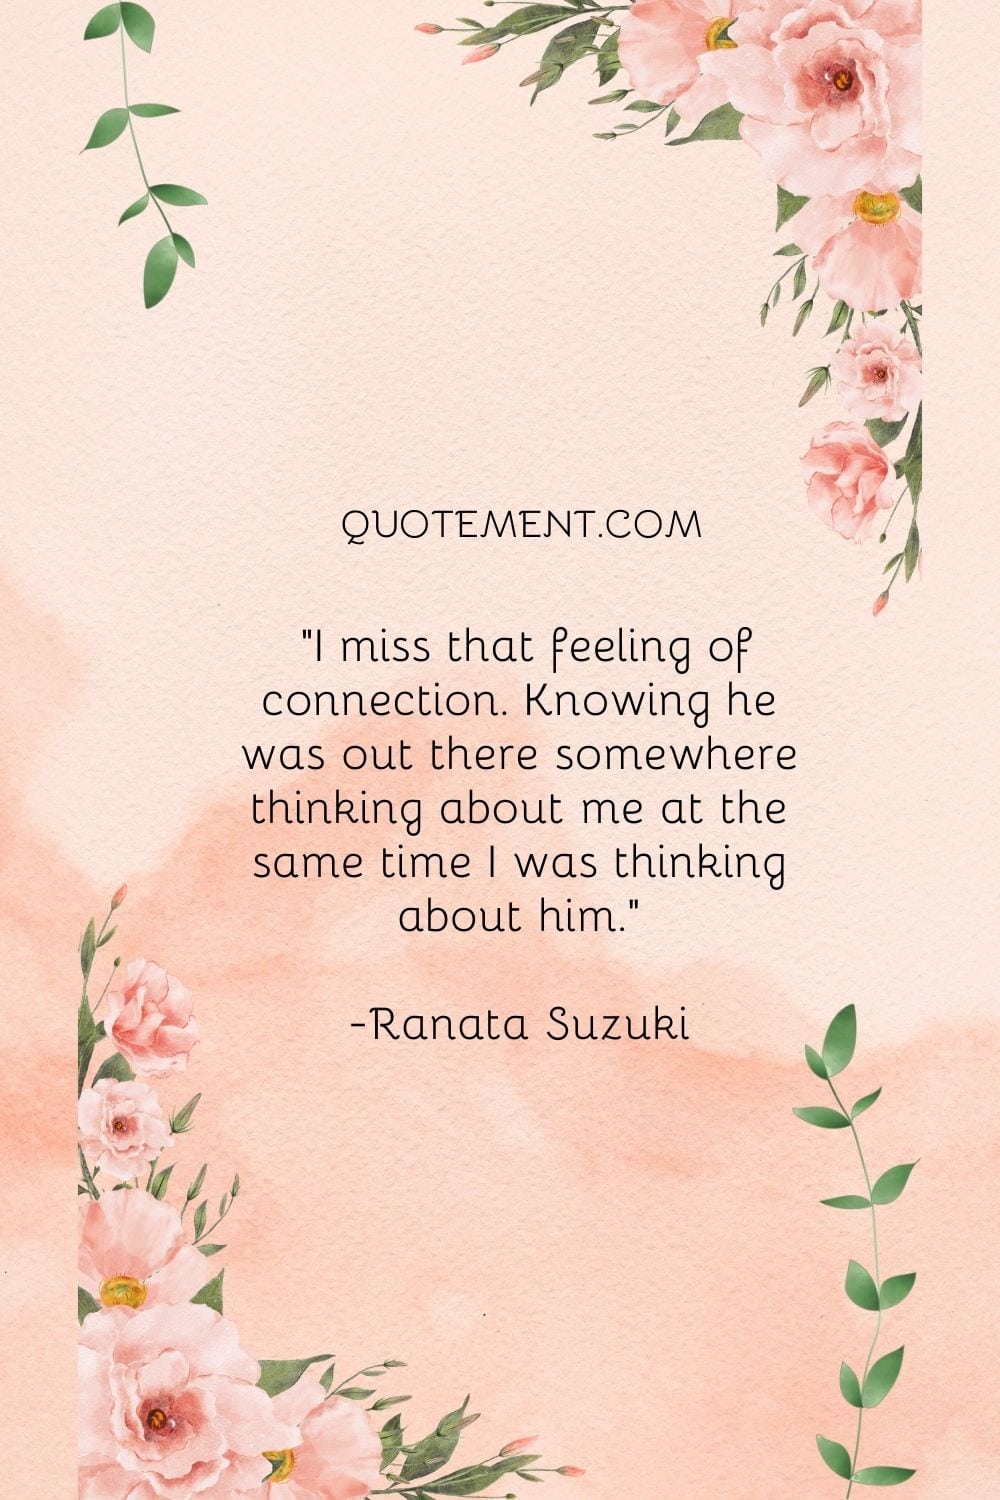 I miss that feeling of connection.